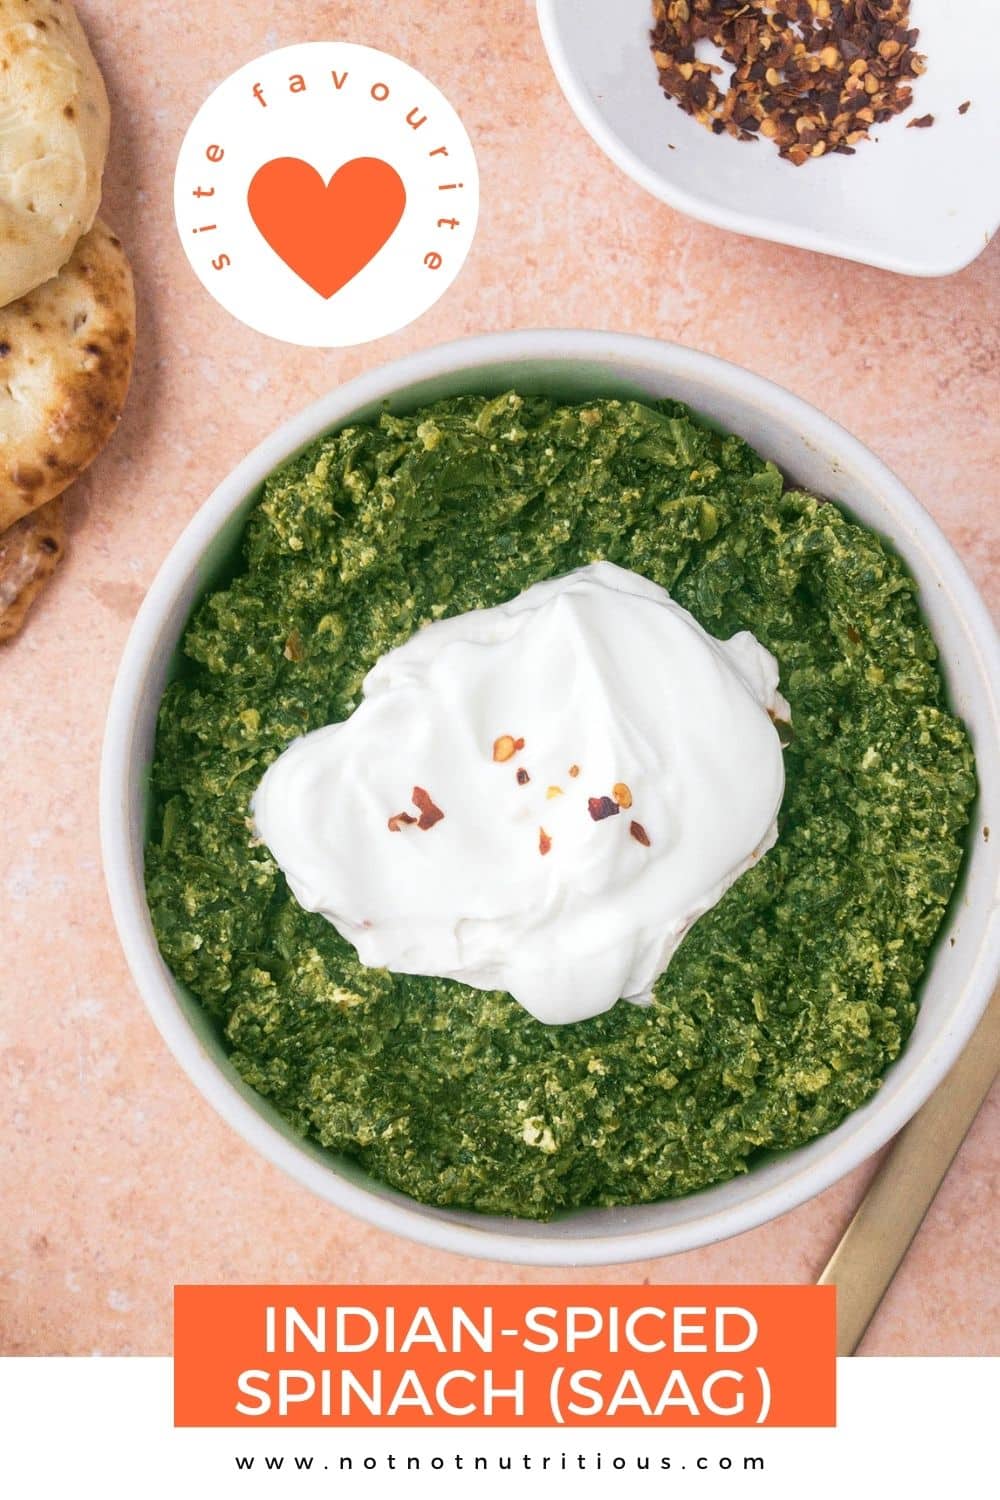 Top-down view of bowl of Indian-spiced spinach (saag), topped with extra yogurt